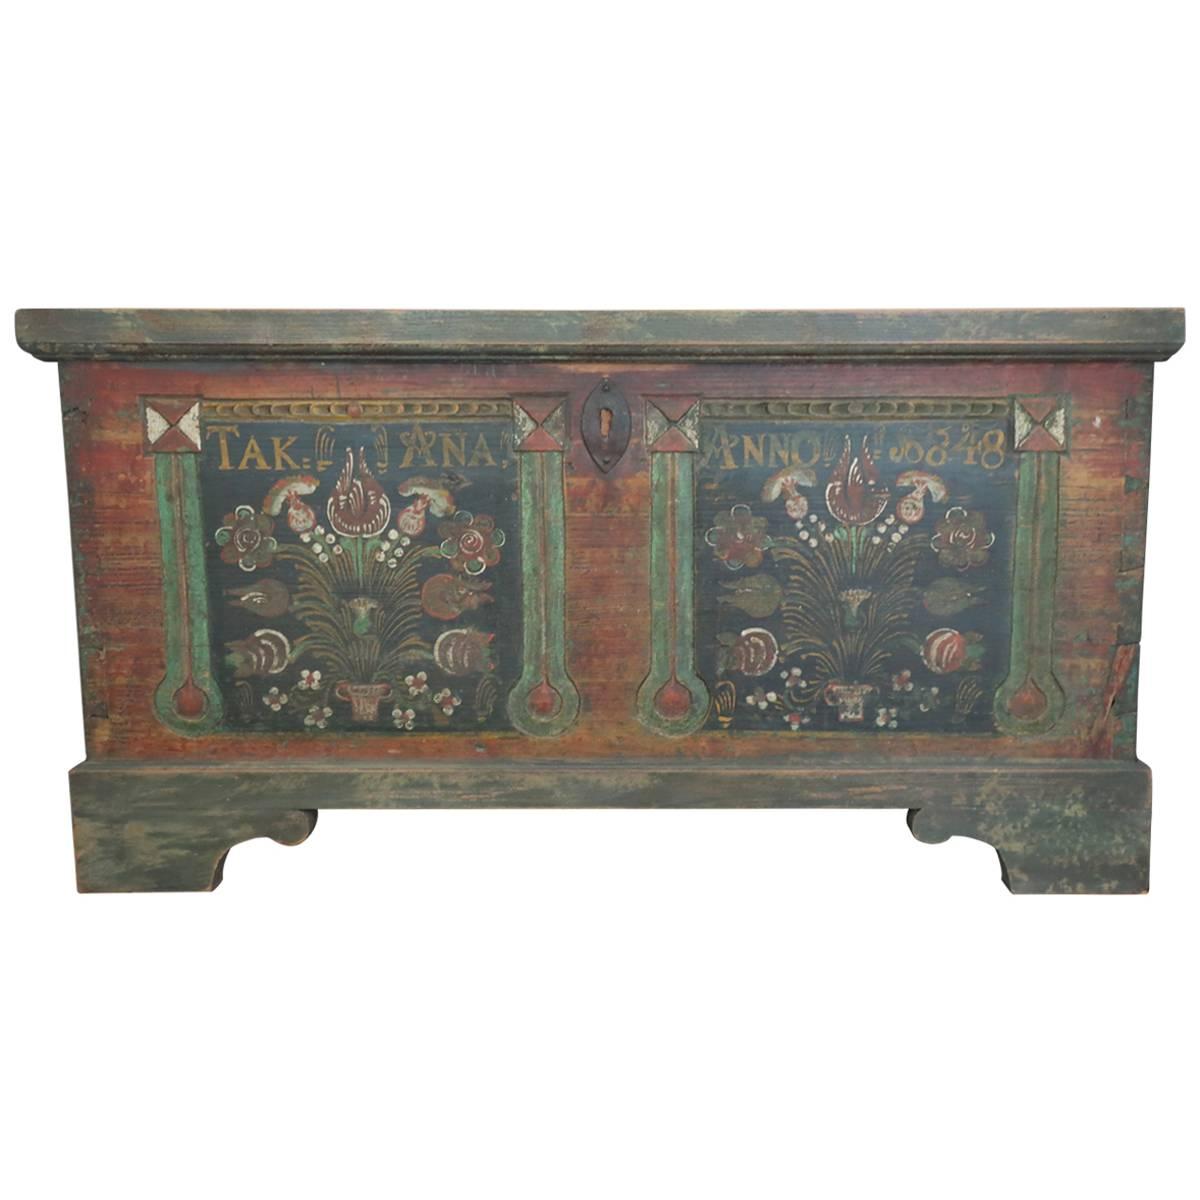 Painted Blanket Chest Signed 1848